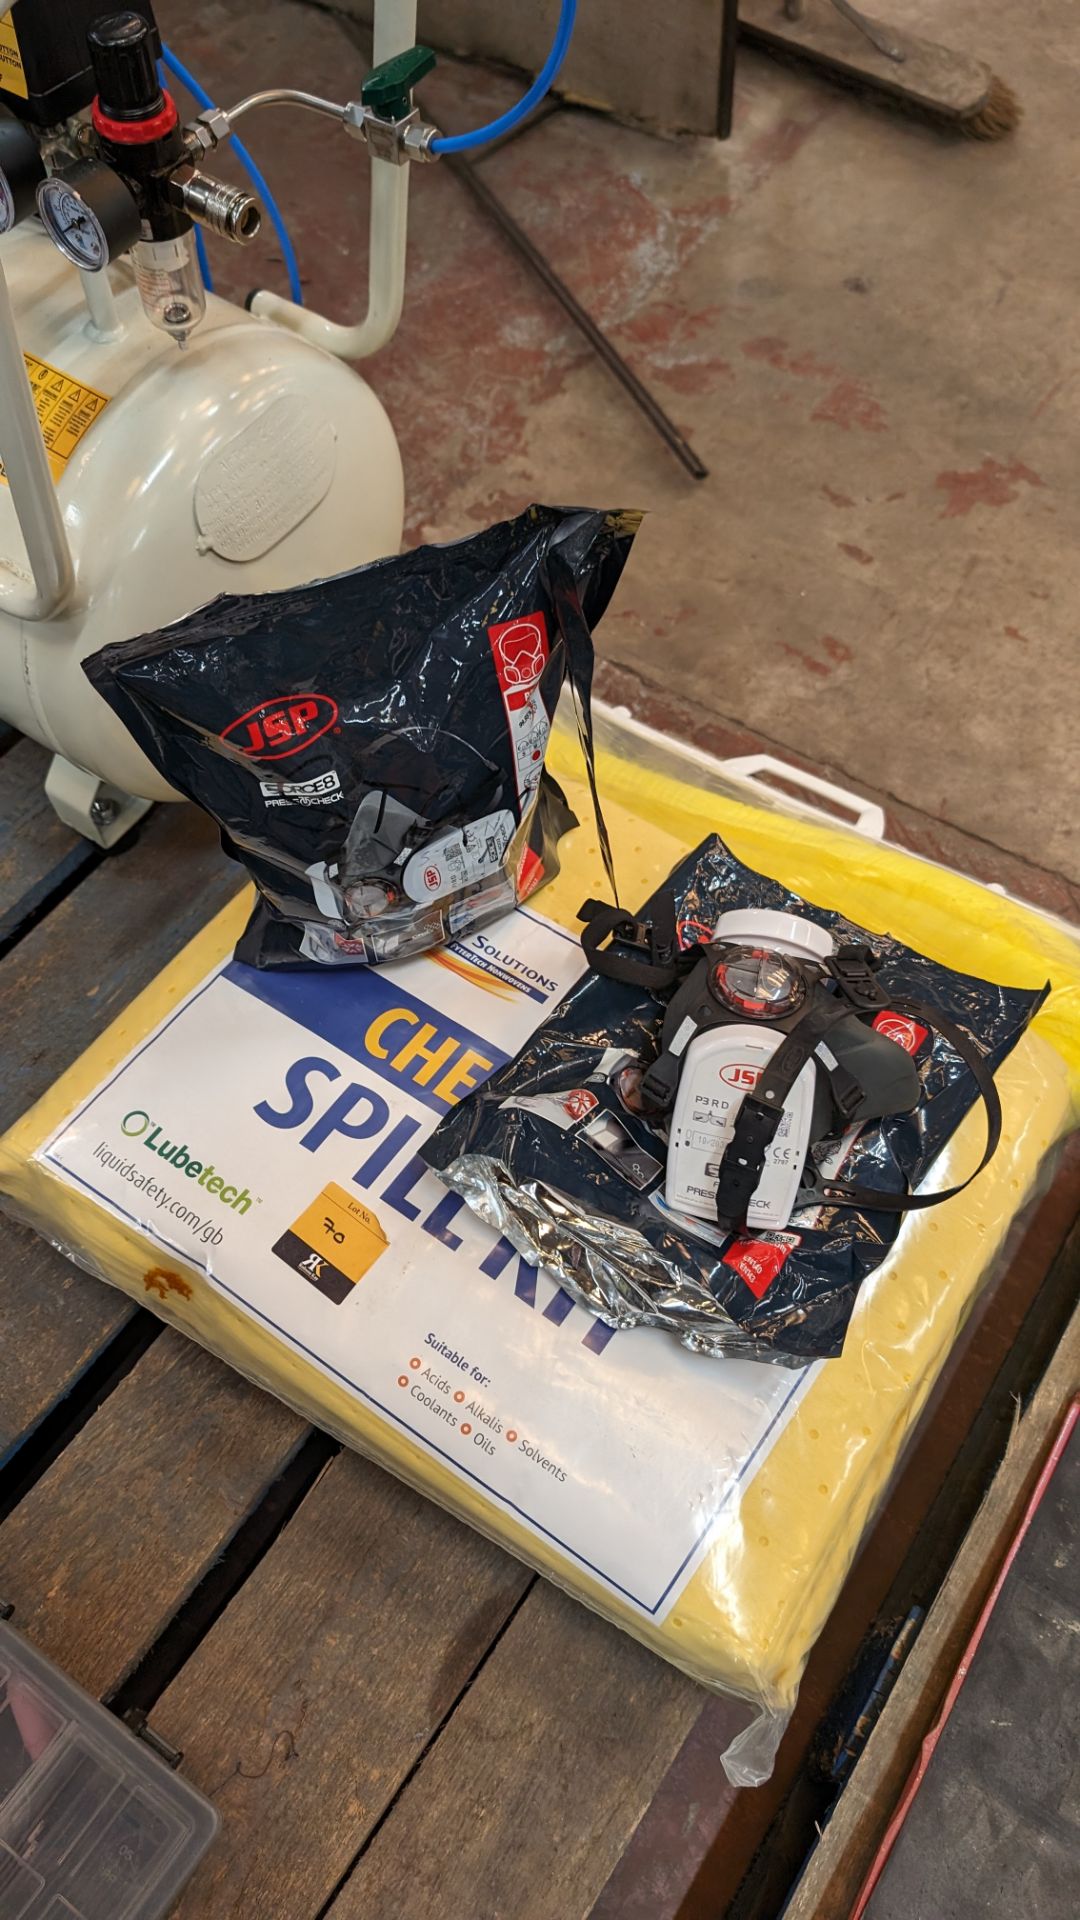 Chemical spill kit plus 2 off respirator devices - Image 8 of 8